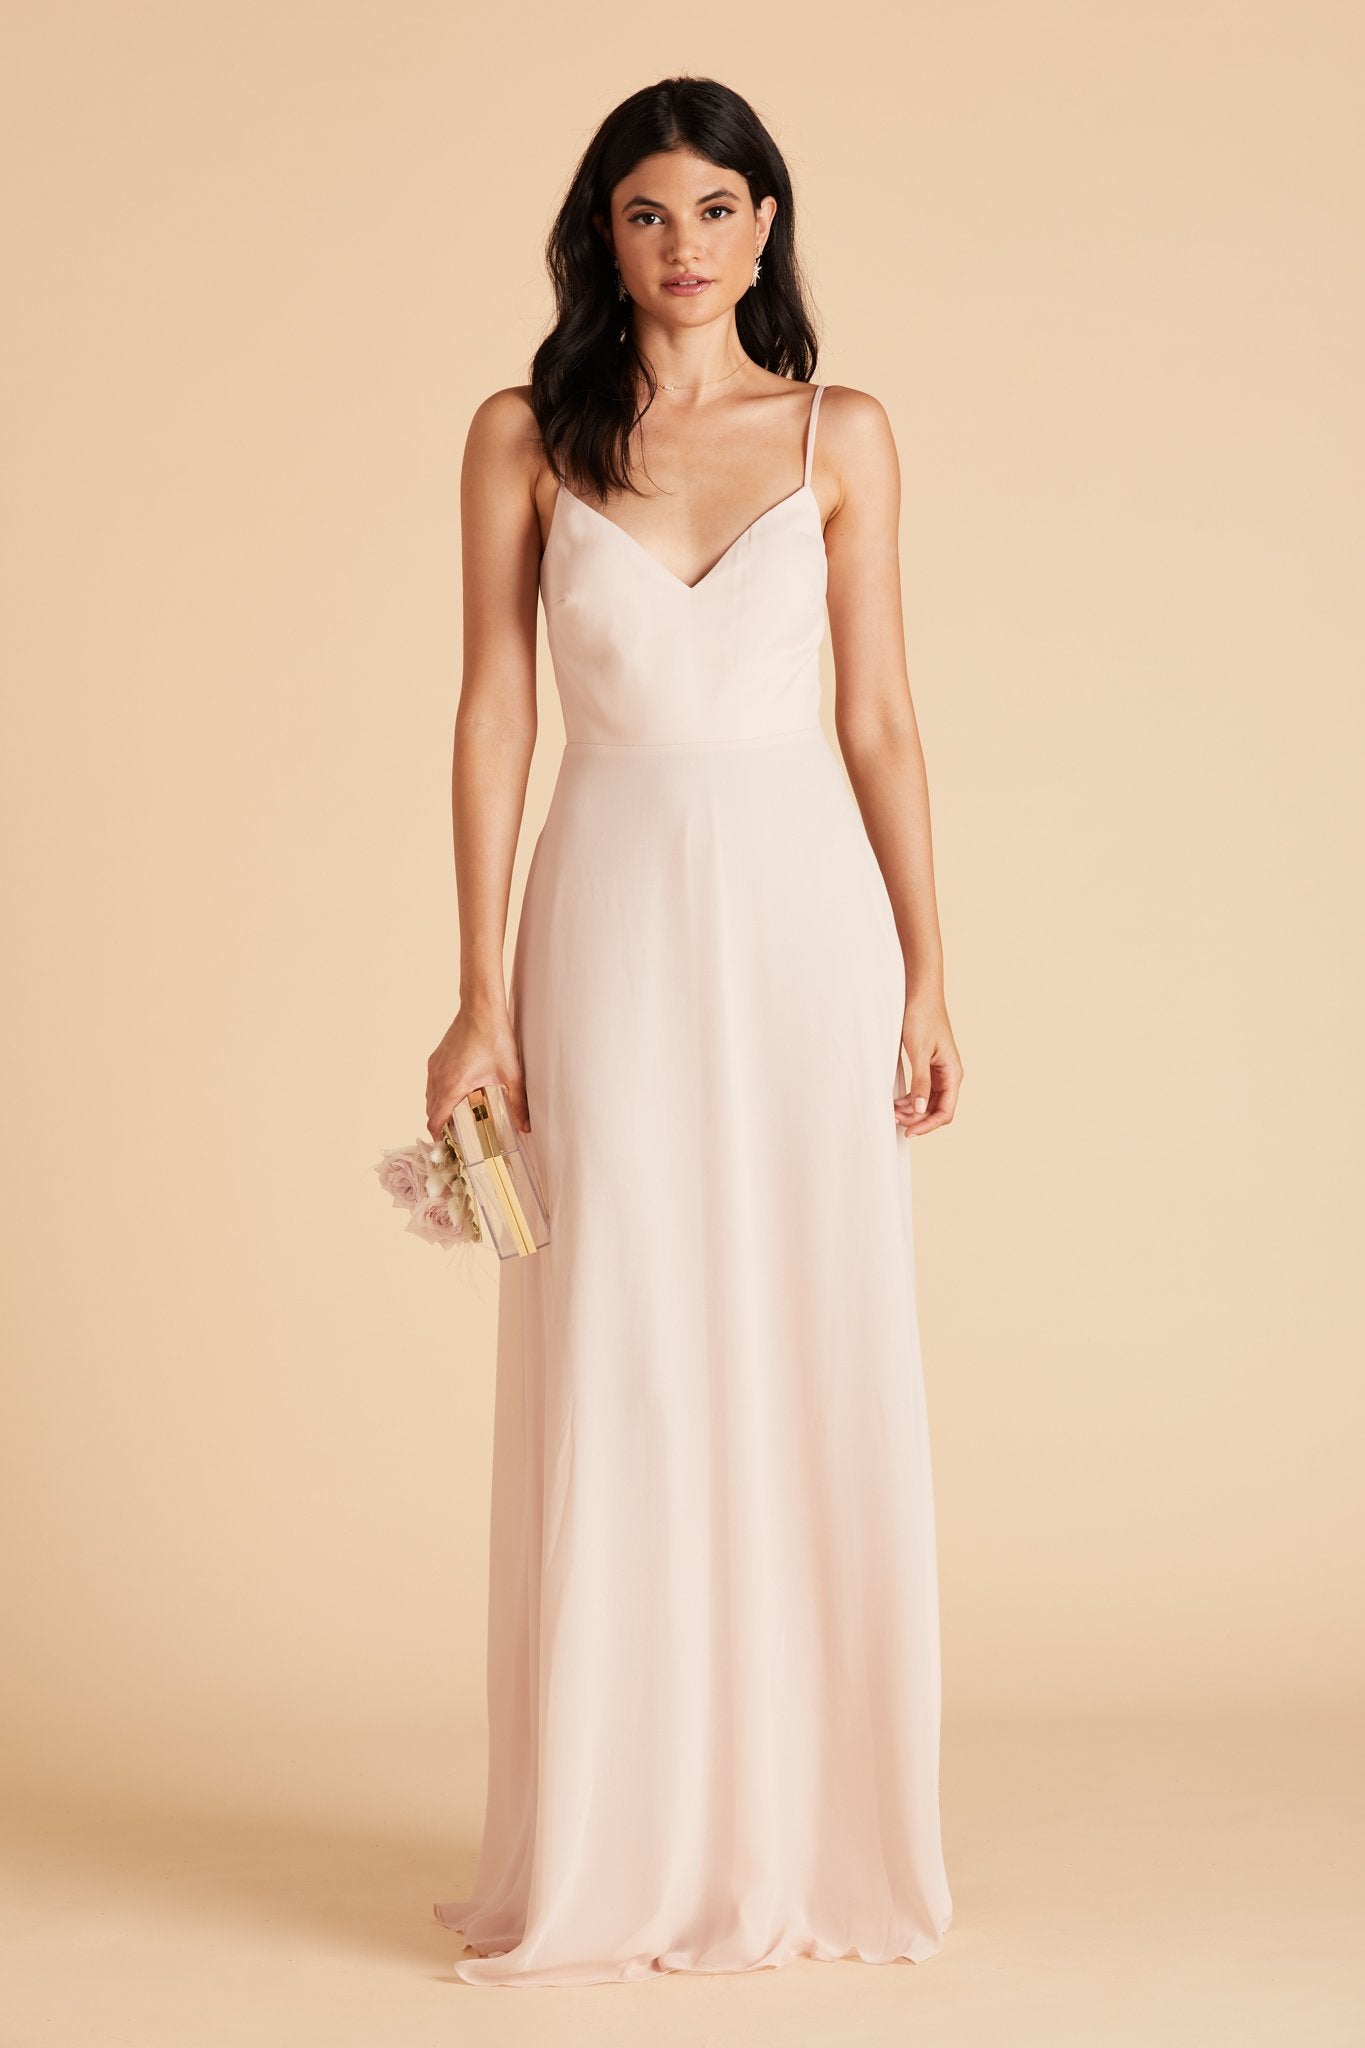 Devin convertible bridesmaids dress in pale blush chiffon by Birdy Grey, front view